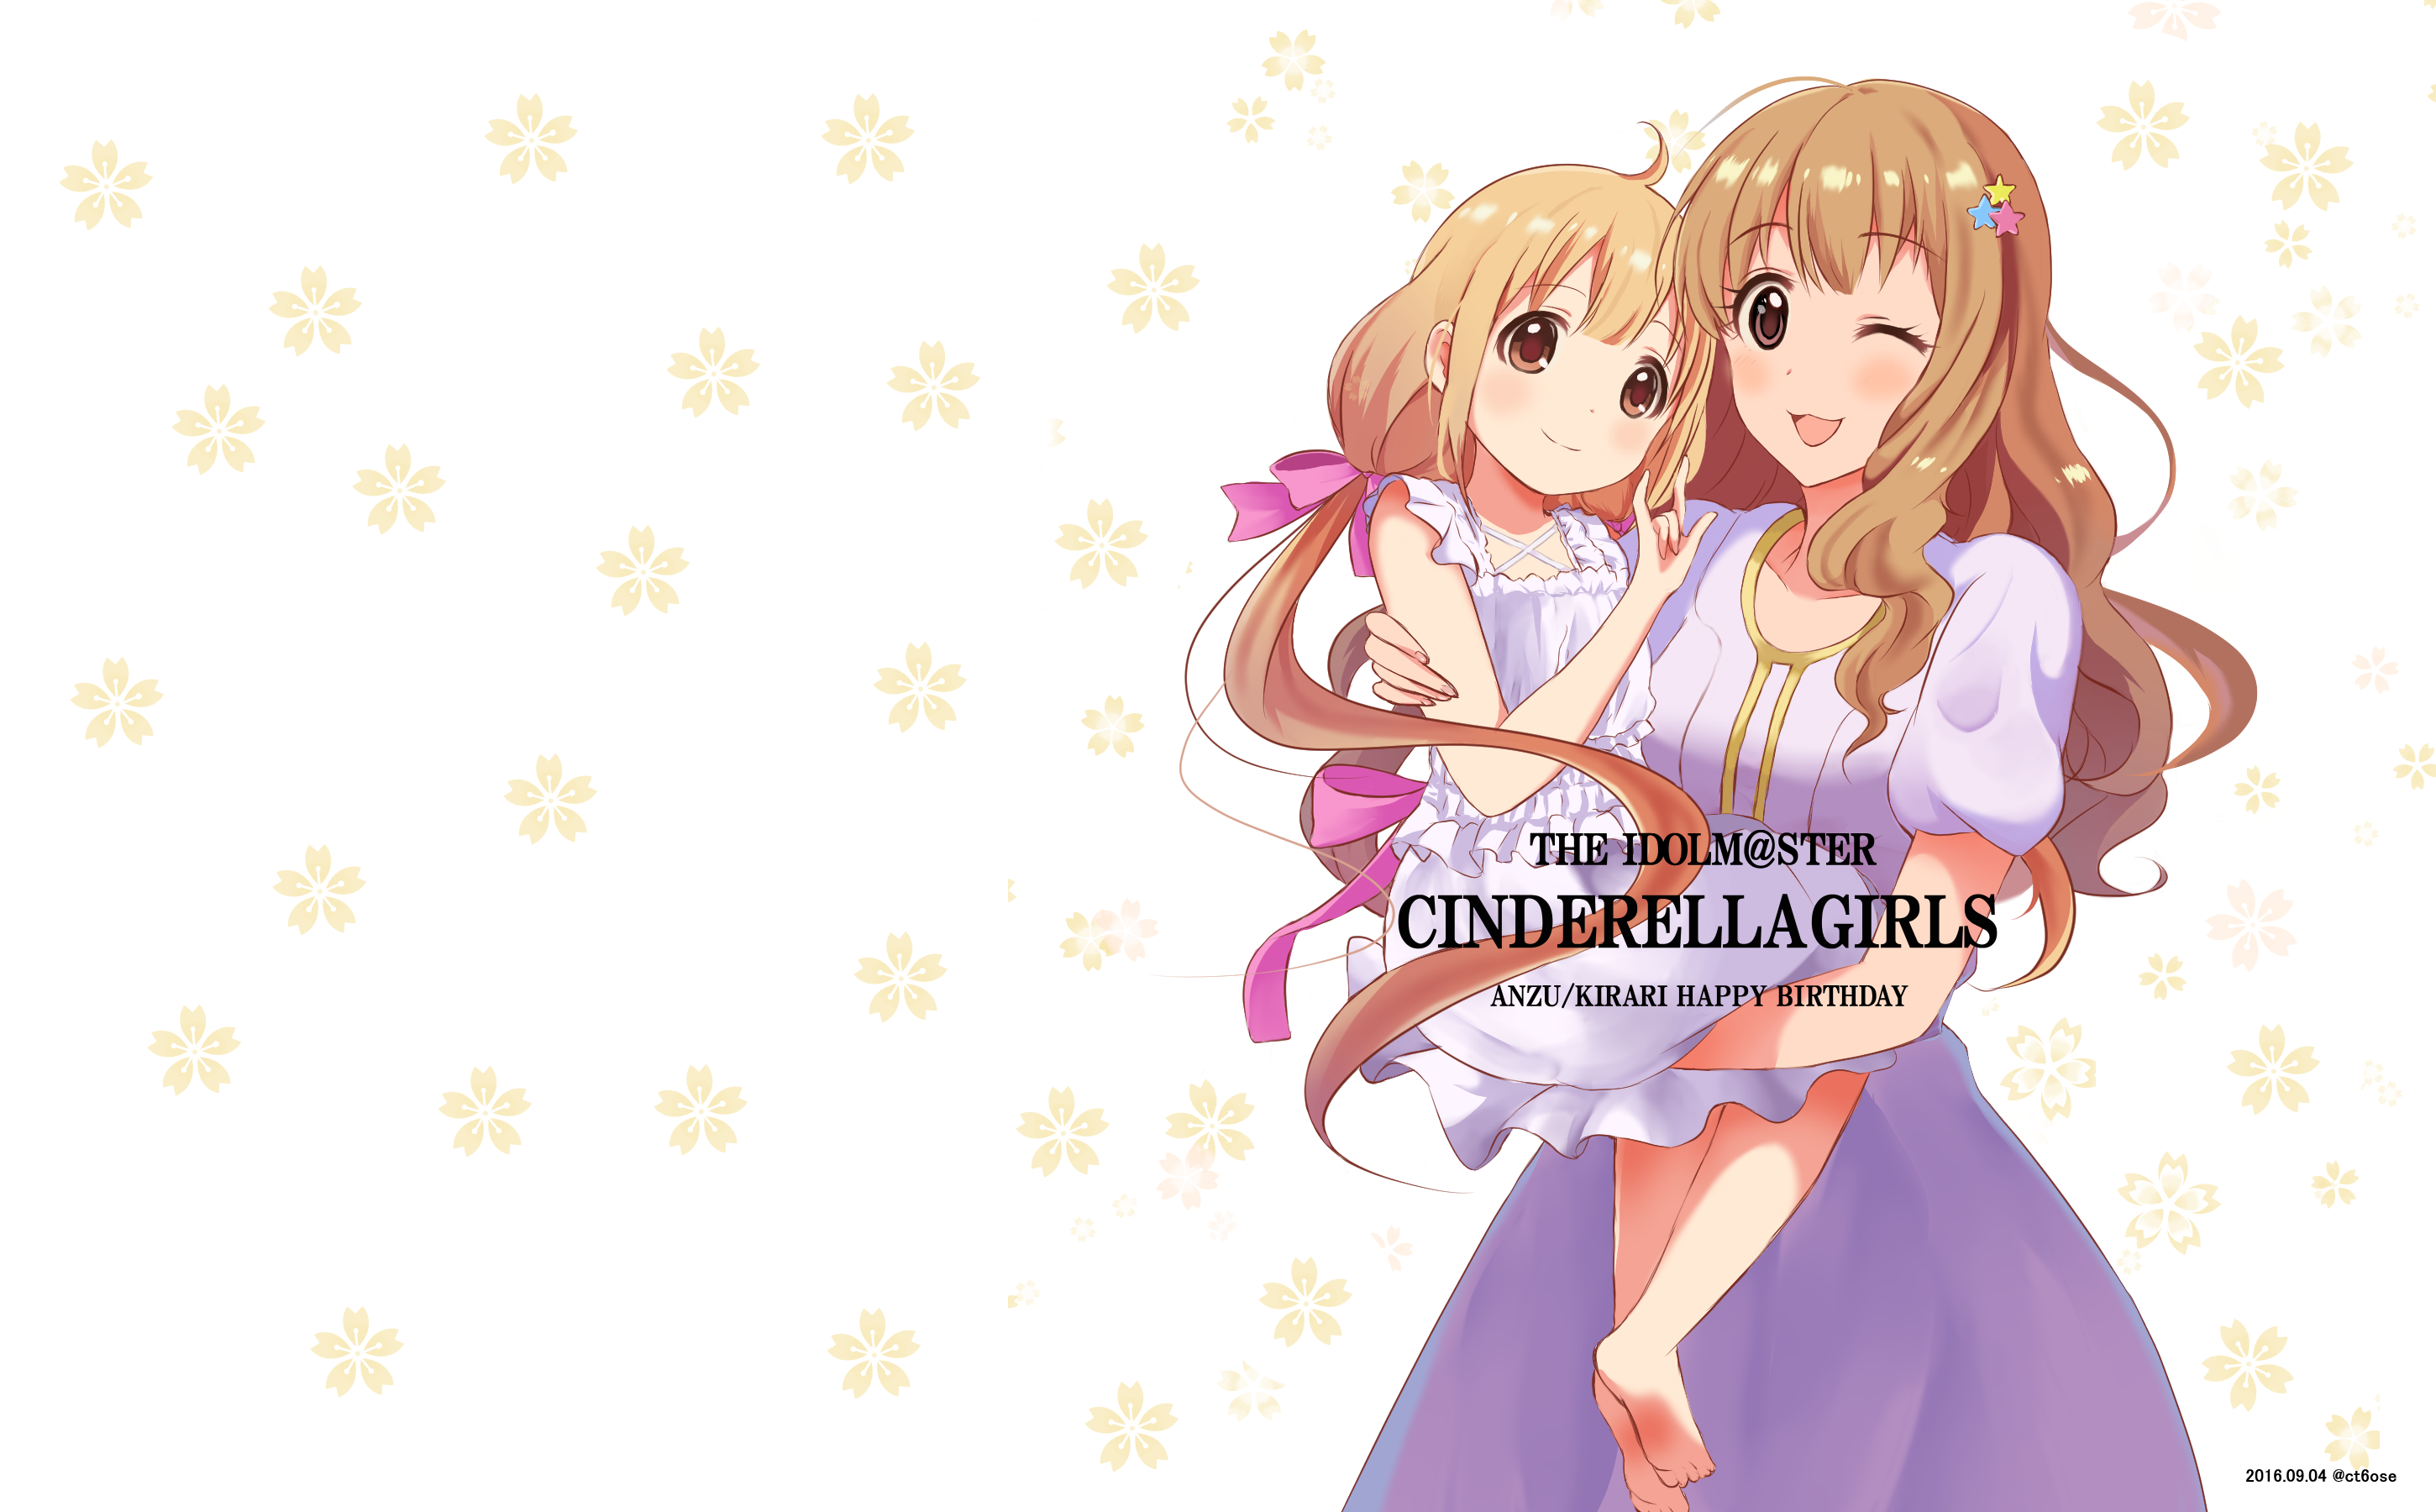 Anime The iDOLM@STER Cinderella Girls HD Wallpaper | Background Image